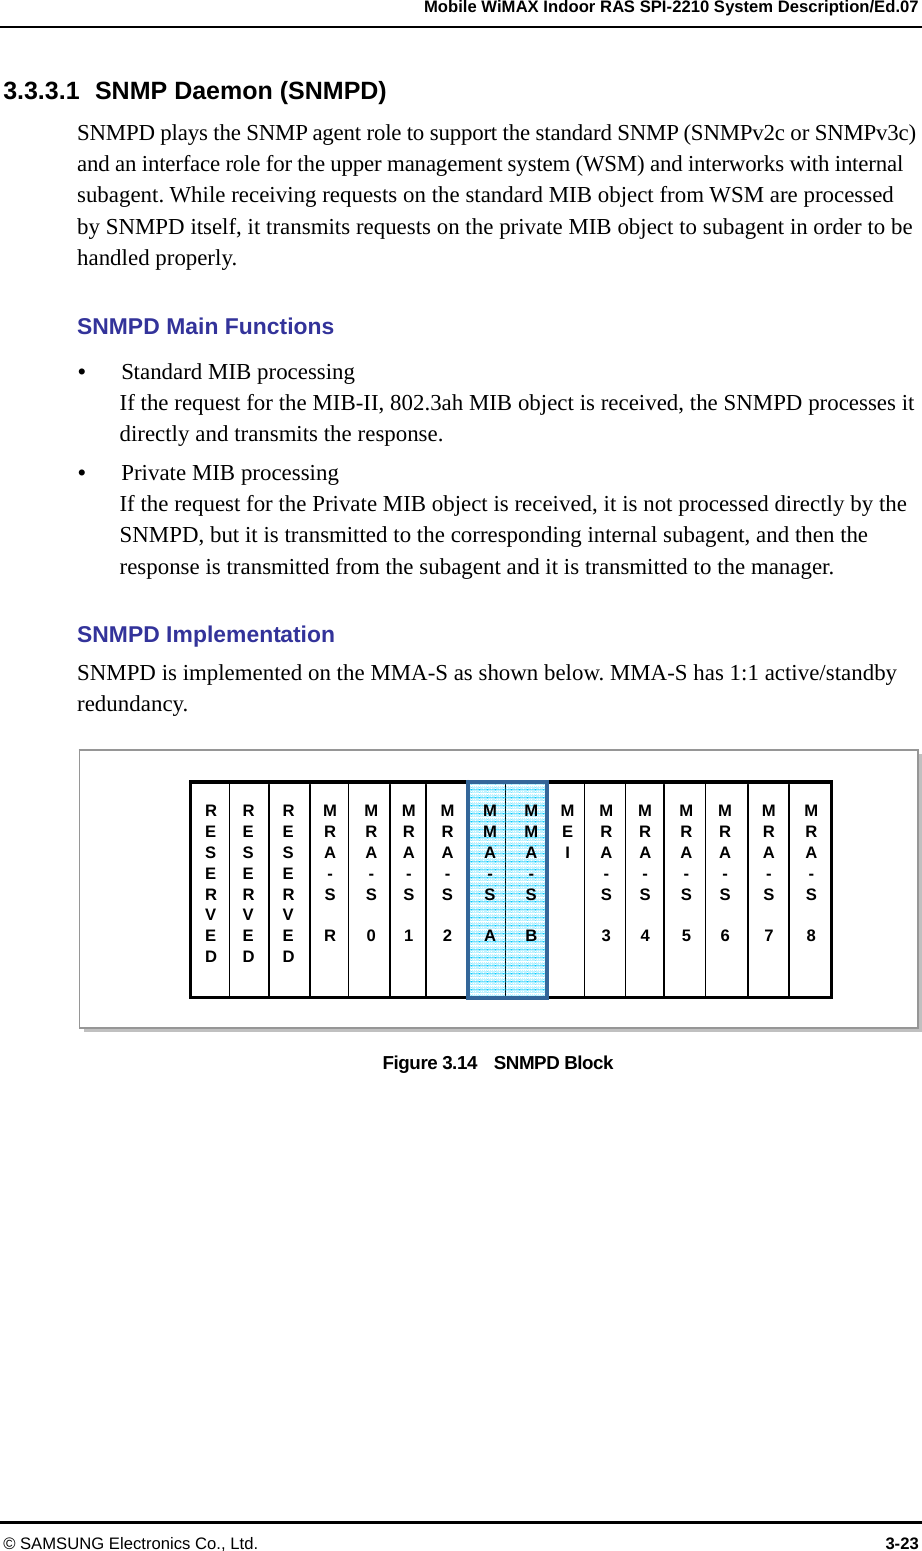   Mobile WiMAX Indoor RAS SPI-2210 System Description/Ed.07 © SAMSUNG Electronics Co., Ltd.  3-23 3.3.3.1  SNMP Daemon (SNMPD) SNMPD plays the SNMP agent role to support the standard SNMP (SNMPv2c or SNMPv3c) and an interface role for the upper management system (WSM) and interworks with internal subagent. While receiving requests on the standard MIB object from WSM are processed by SNMPD itself, it transmits requests on the private MIB object to subagent in order to be handled properly.  SNMPD Main Functions y Standard MIB processing If the request for the MIB-II, 802.3ah MIB object is received, the SNMPD processes it directly and transmits the response. y Private MIB processing If the request for the Private MIB object is received, it is not processed directly by the SNMPD, but it is transmitted to the corresponding internal subagent, and then the response is transmitted from the subagent and it is transmitted to the manager.  SNMPD Implementation SNMPD is implemented on the MMA-S as shown below. MMA-S has 1:1 active/standby redundancy.  Figure 3.14    SNMPD Block  RESERVED RESERVED RESERVED MRA- S  R MRA- S 0MRA- S 1MRA- S 2MMA- S AMMA- S BMRA- S 3MRA- S 4MEI MRA- S 5MRA- S  6 MRA- S  7 MRA- S  8  